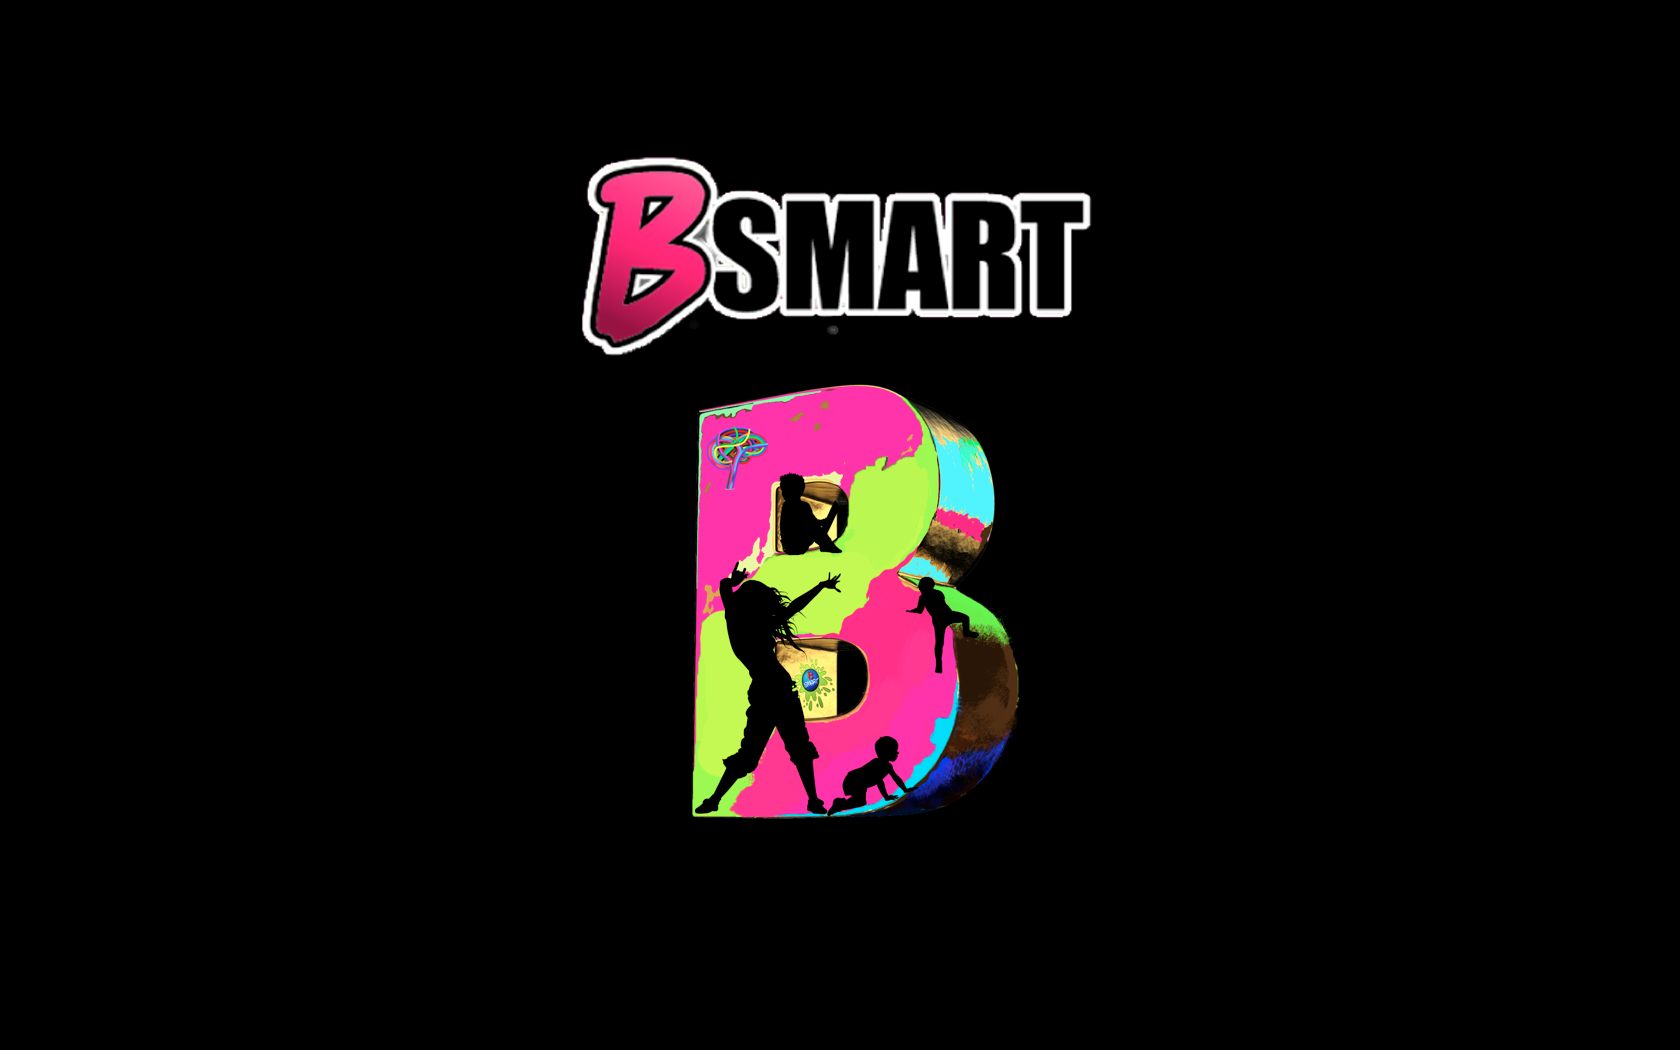 Welcome_to_BSMART_reg width_slightly bigger_MAY8.001.png